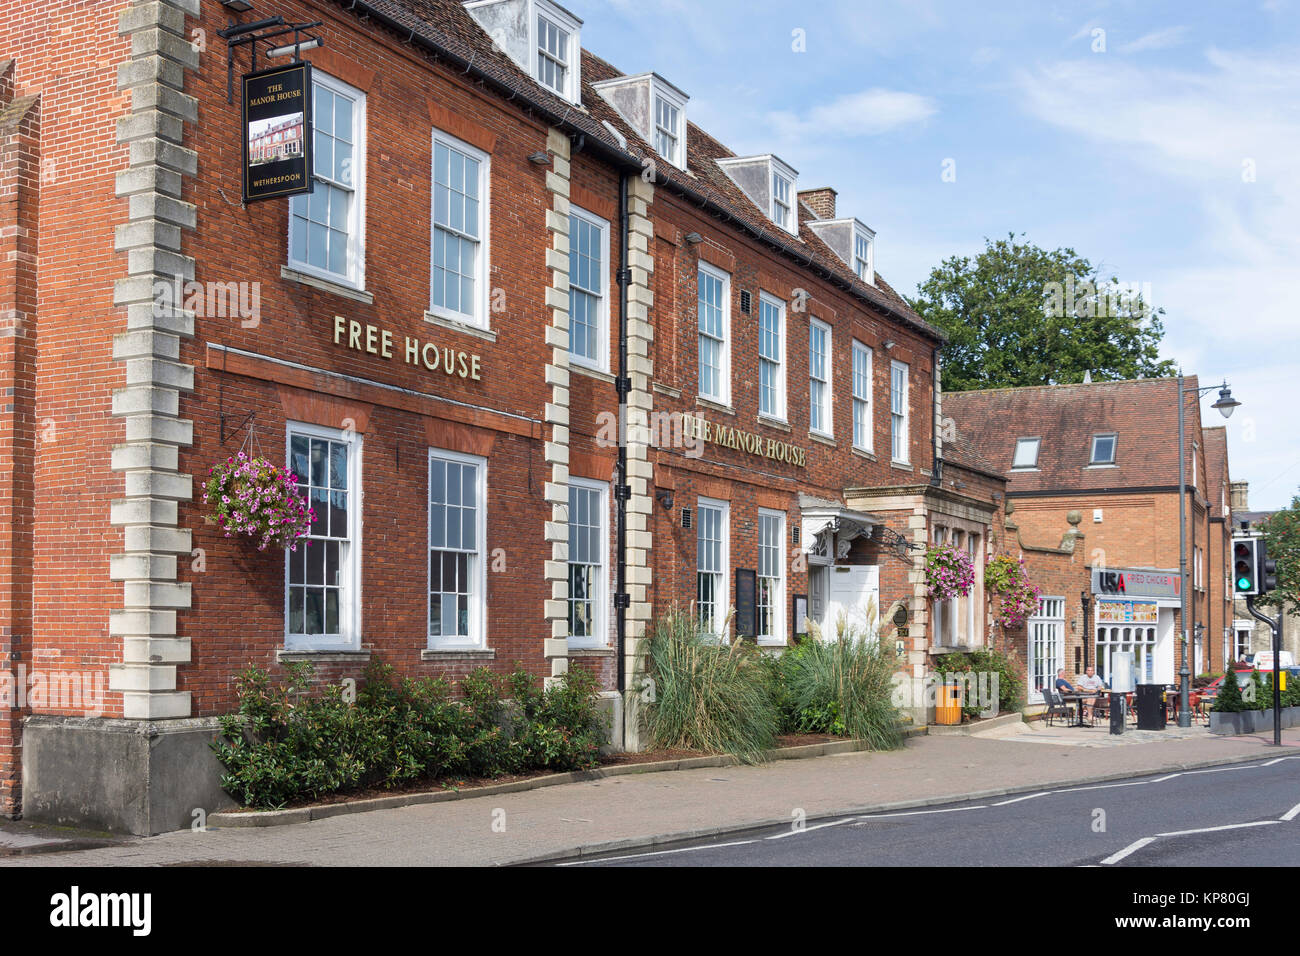 L'Wetherspoons Manor House Pub, Melbourn Street, Royston, Hertfordshire, Angleterre, Royaume-Uni Banque D'Images